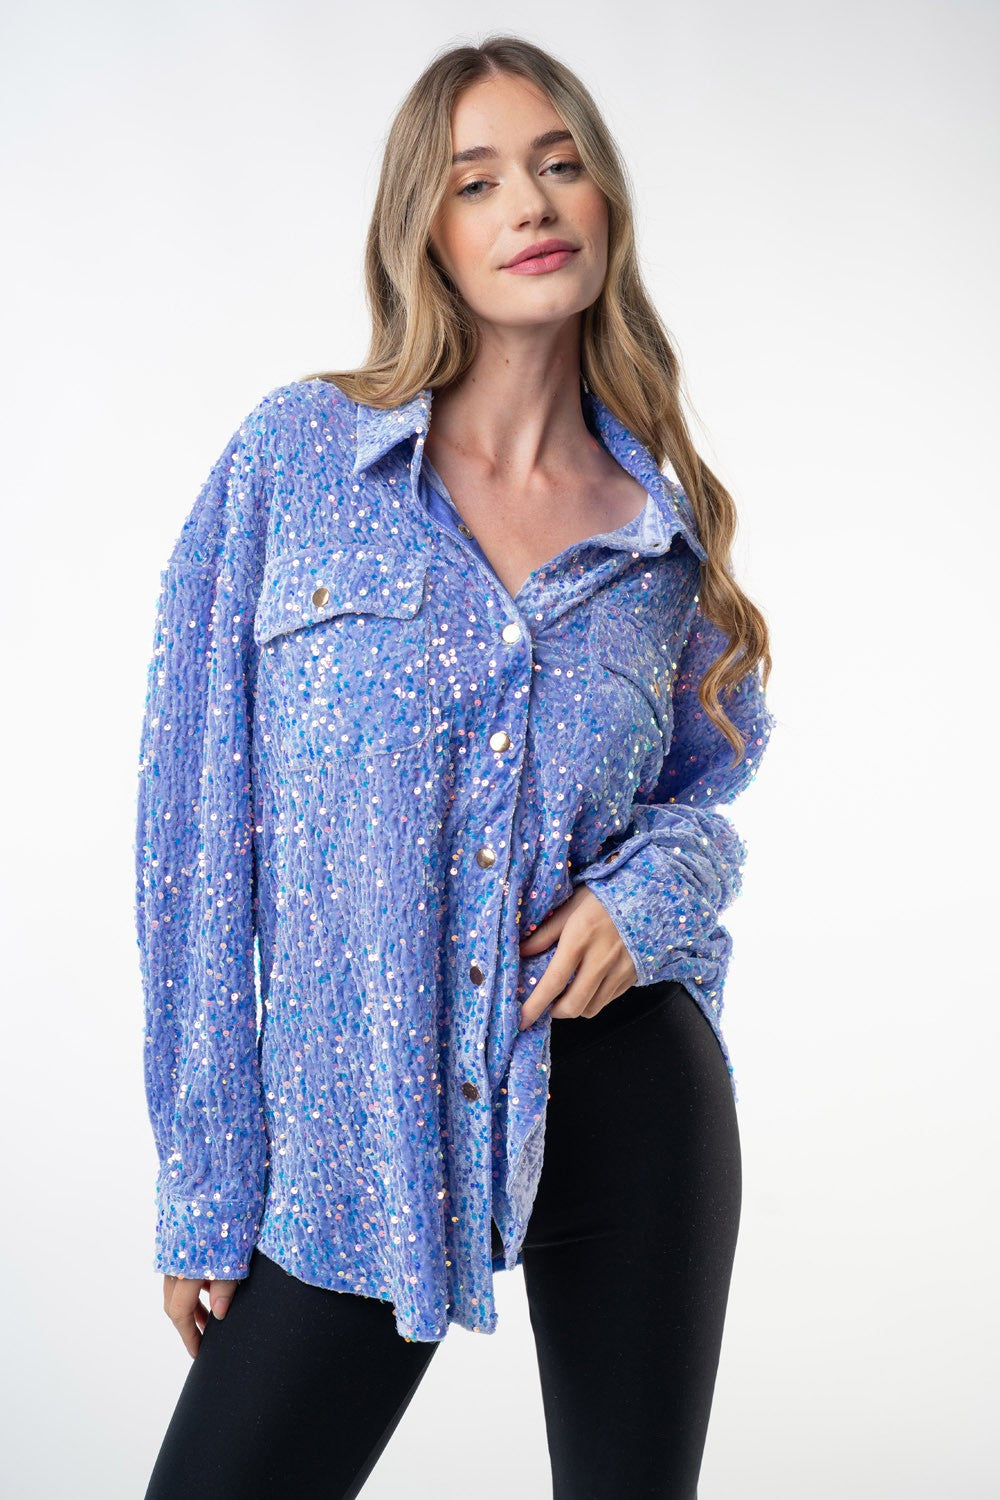 Periwinkle Long Sleeve Sequin Knit Top